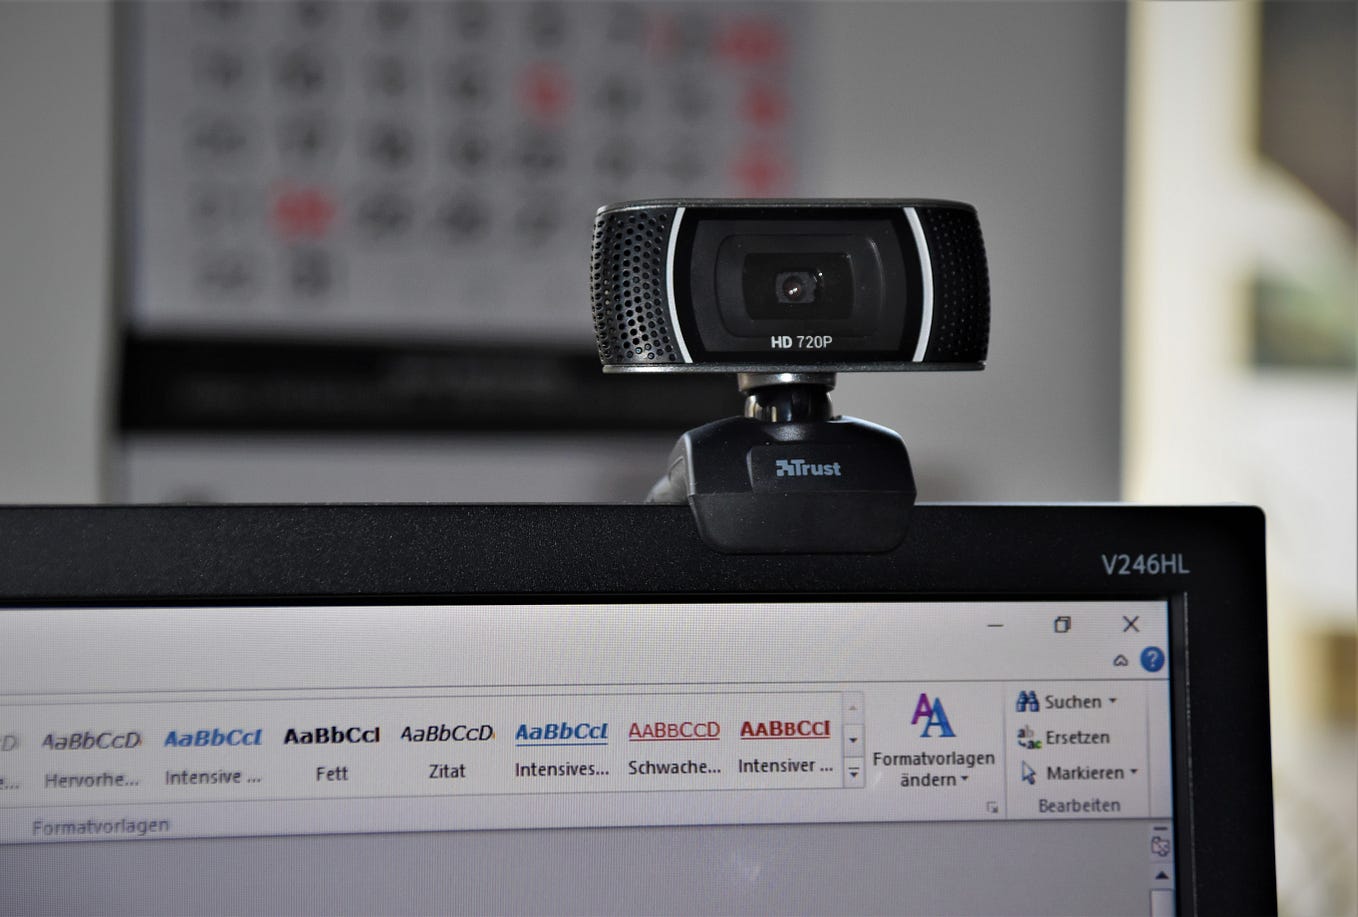 How to record video from a camera using OpenCV and python on Mac